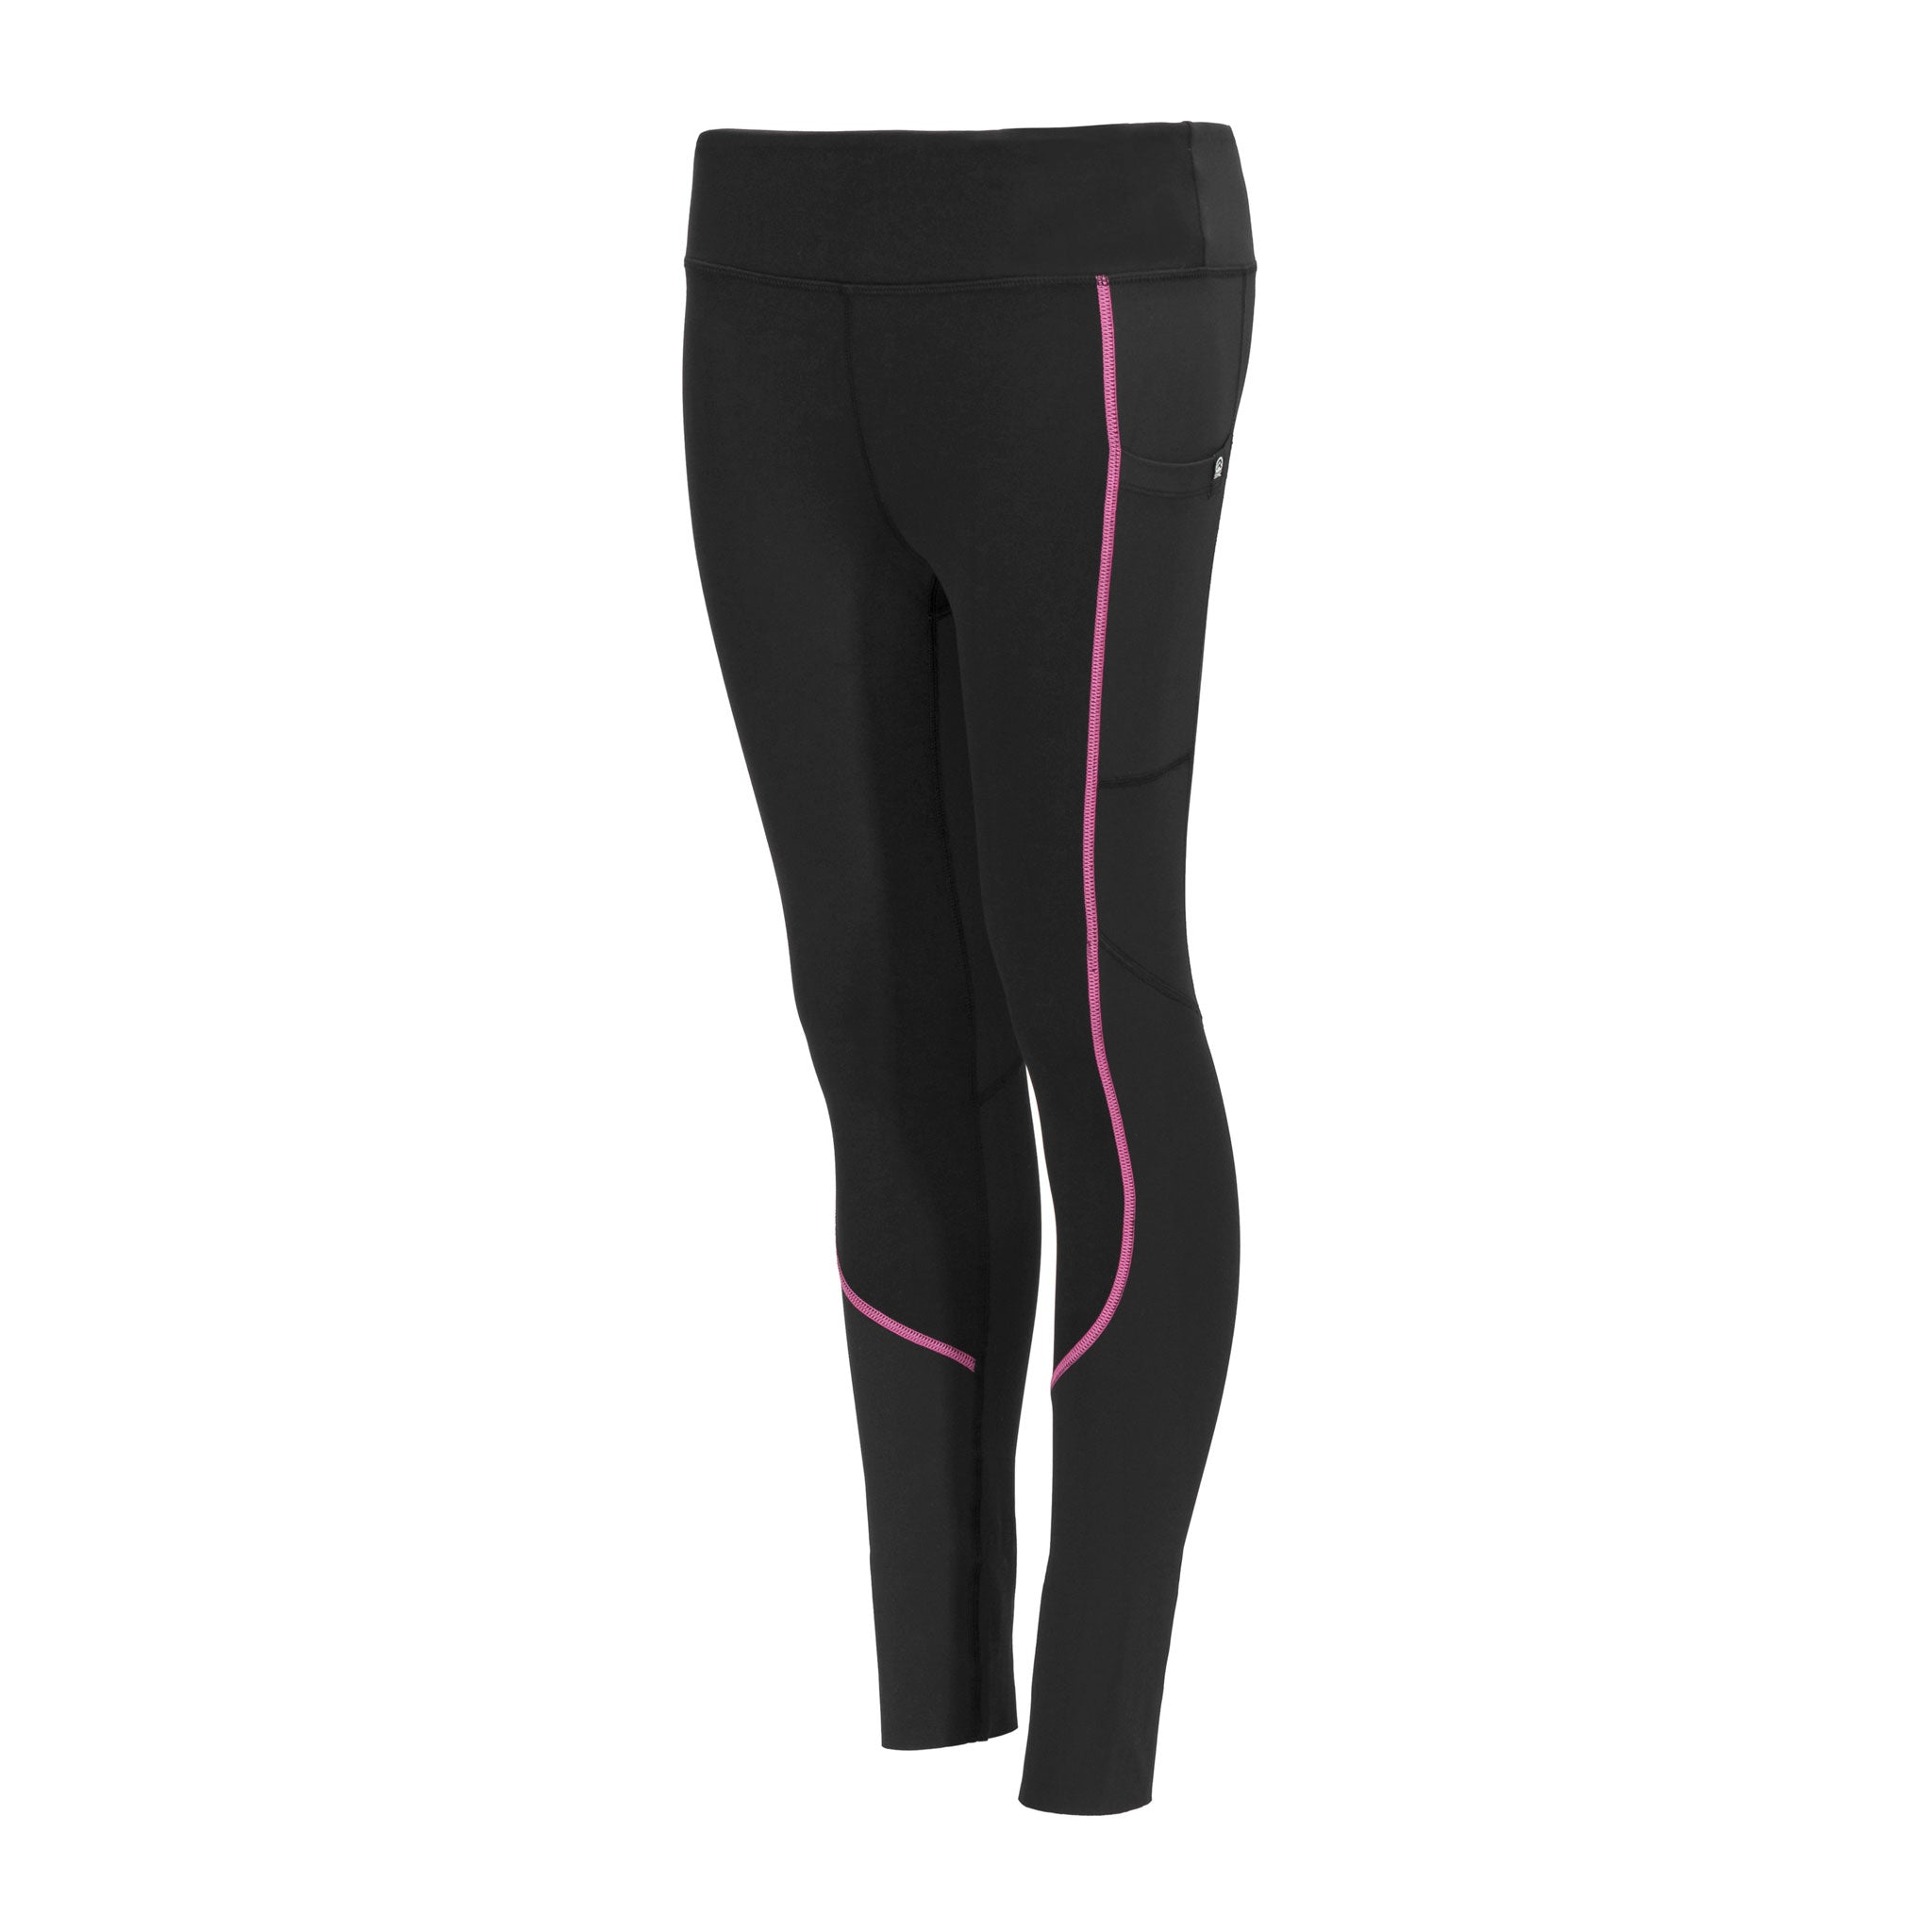 Girl Tights, Leggings at Best Prices Online